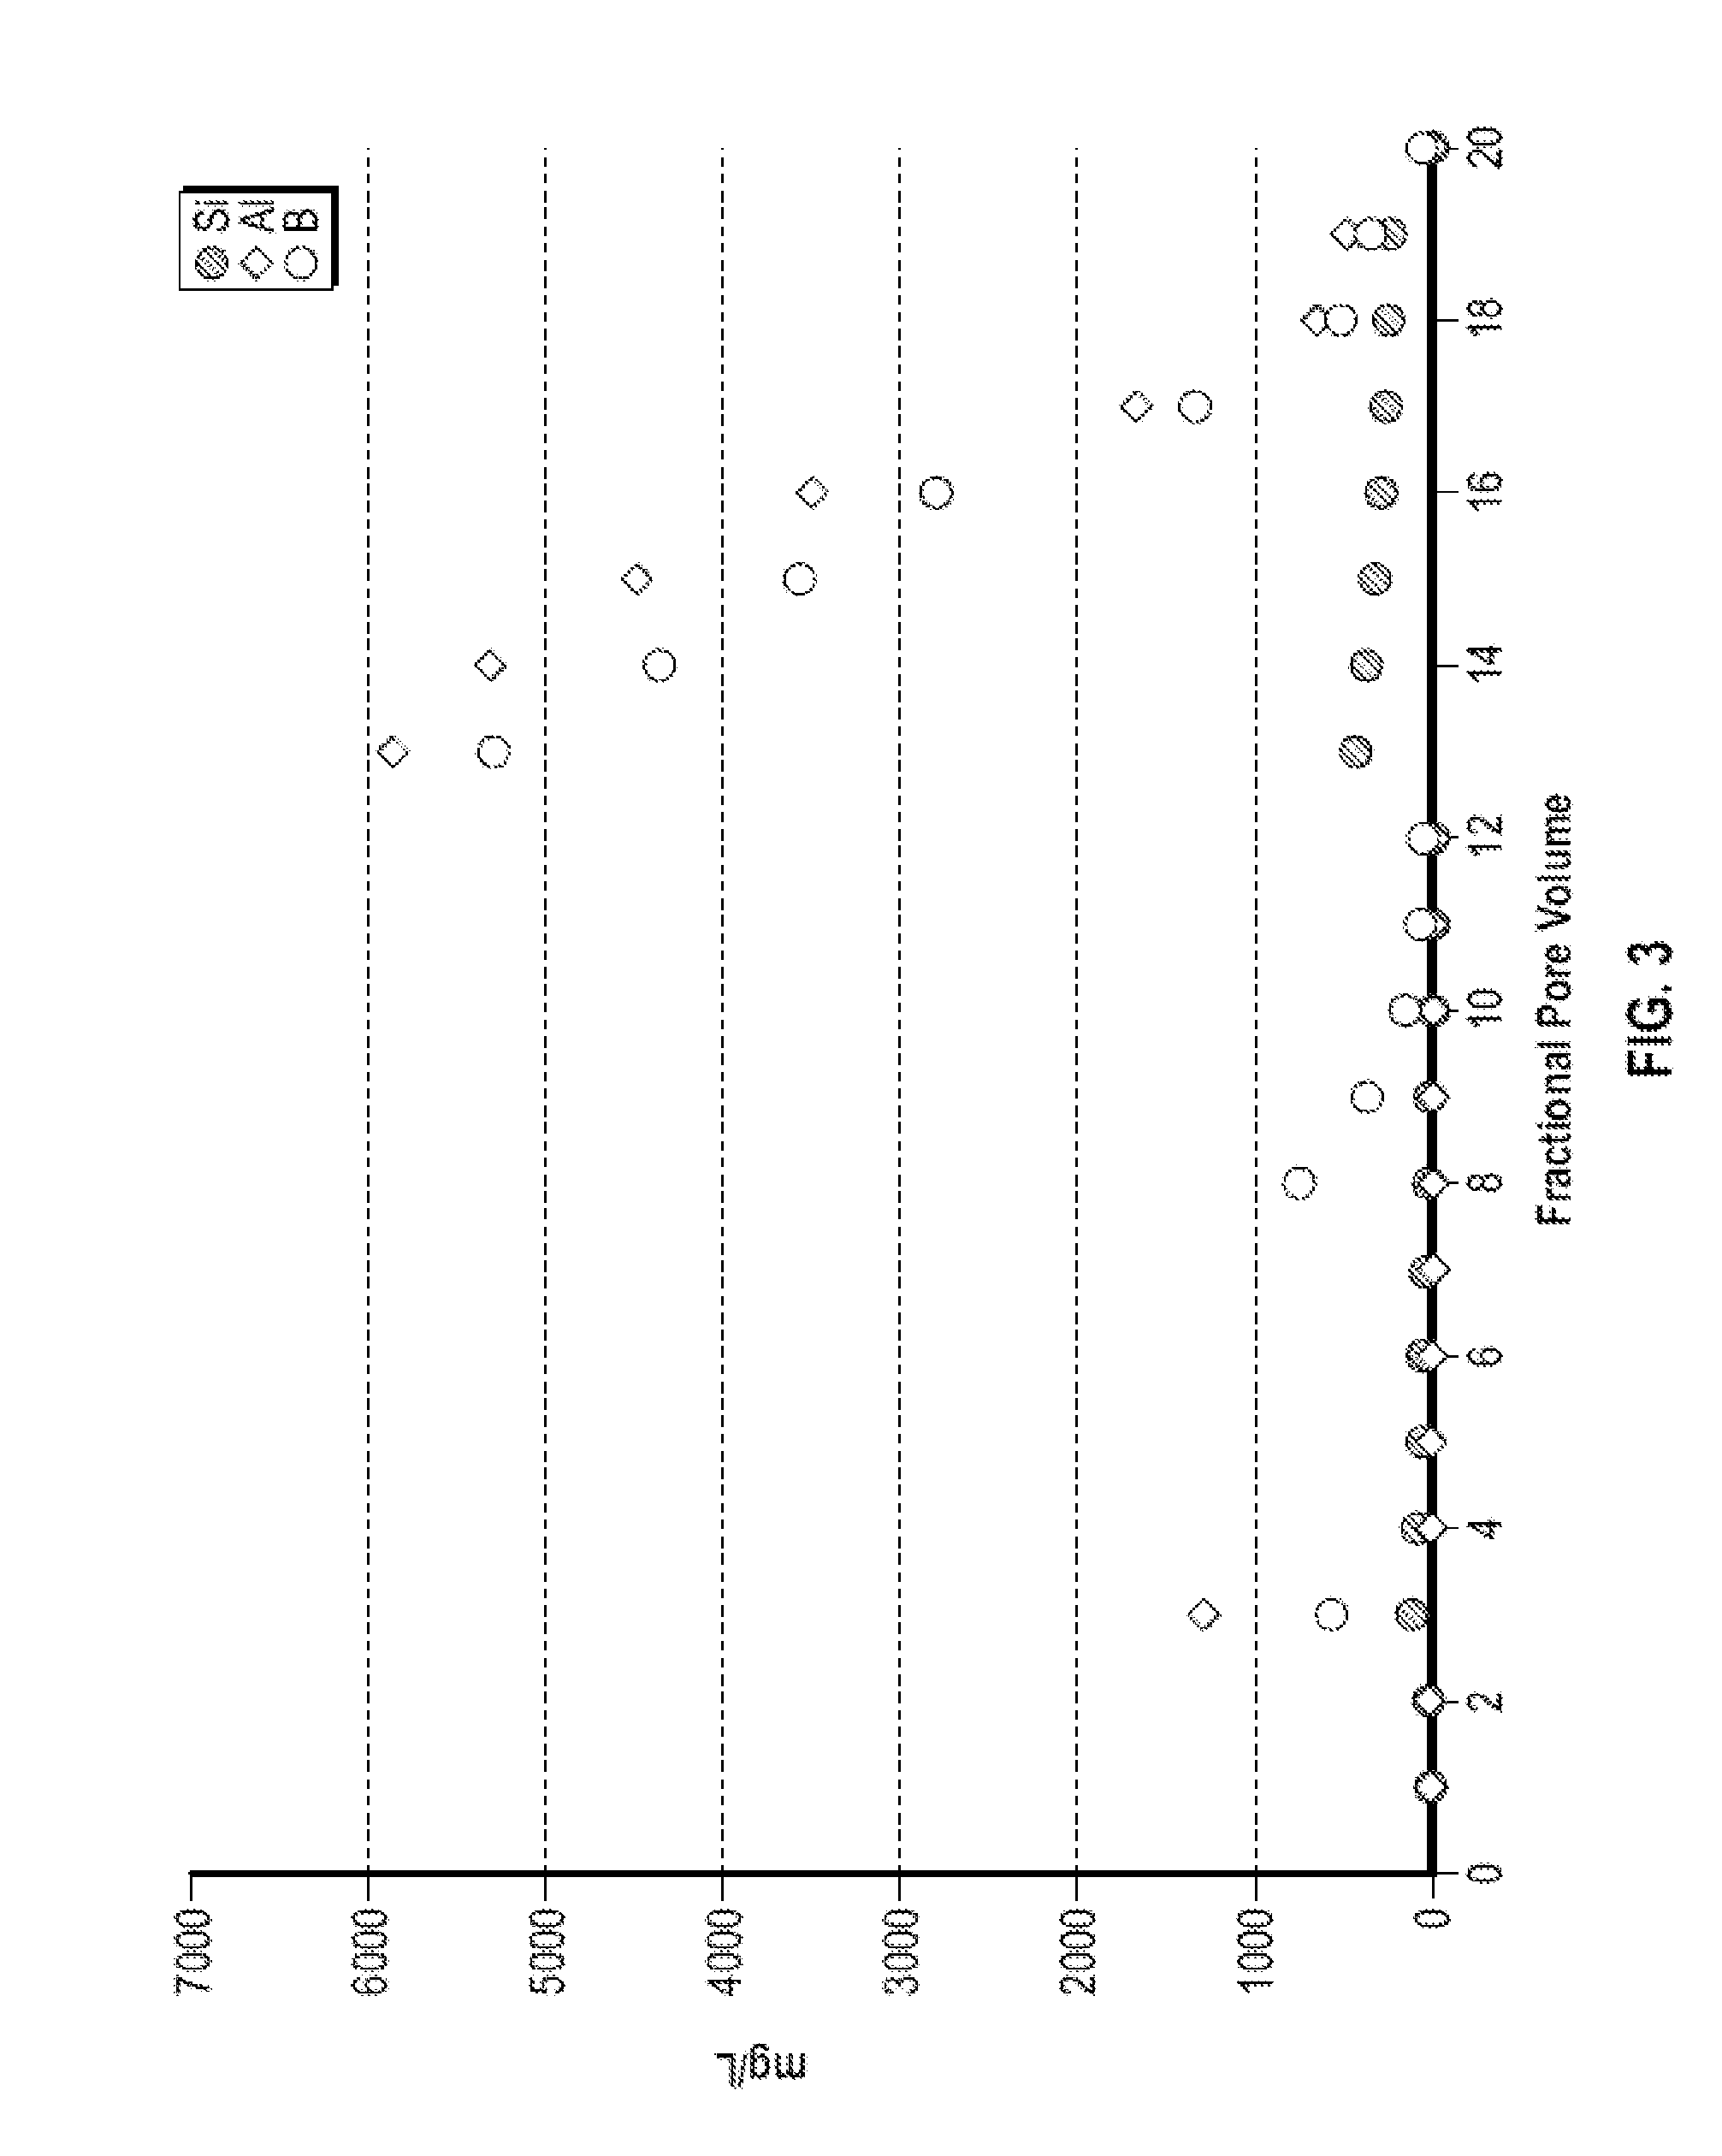 Treatment fluids containing a boron trifluoride complex and methods for use thereof